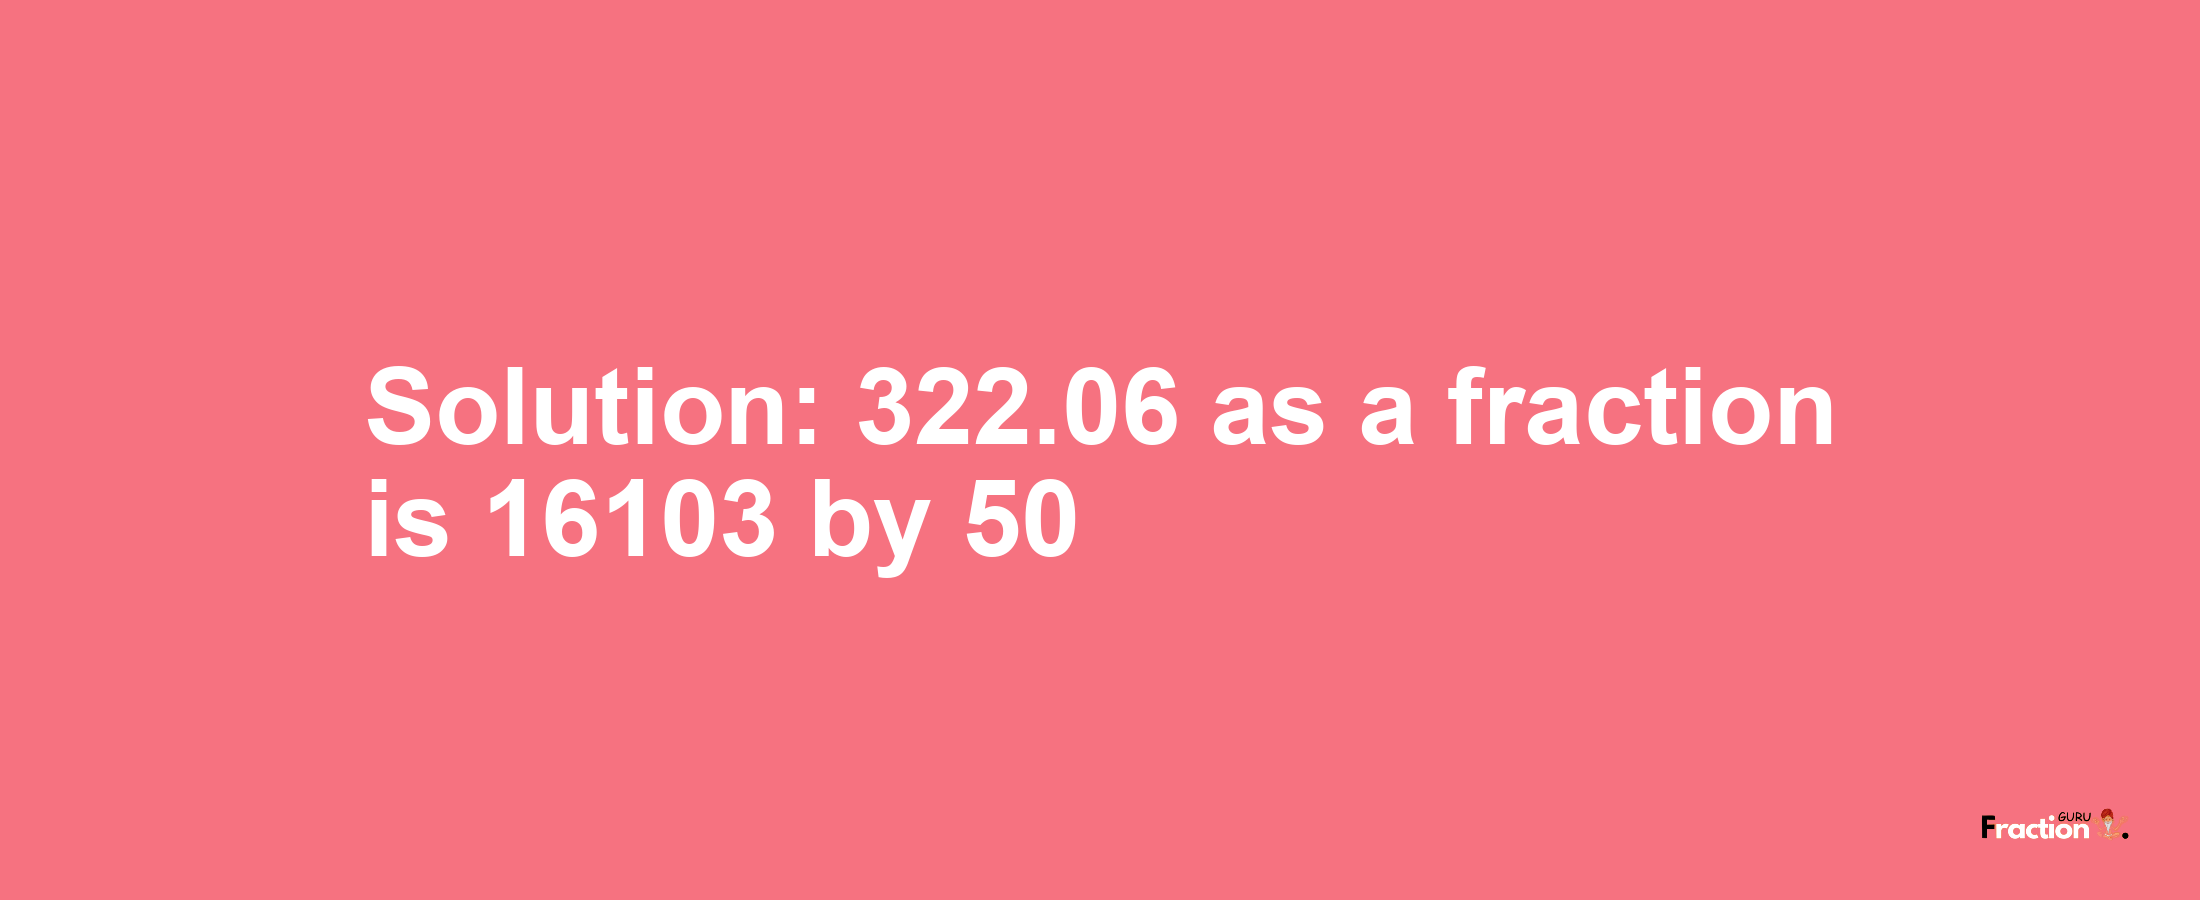 Solution:322.06 as a fraction is 16103/50